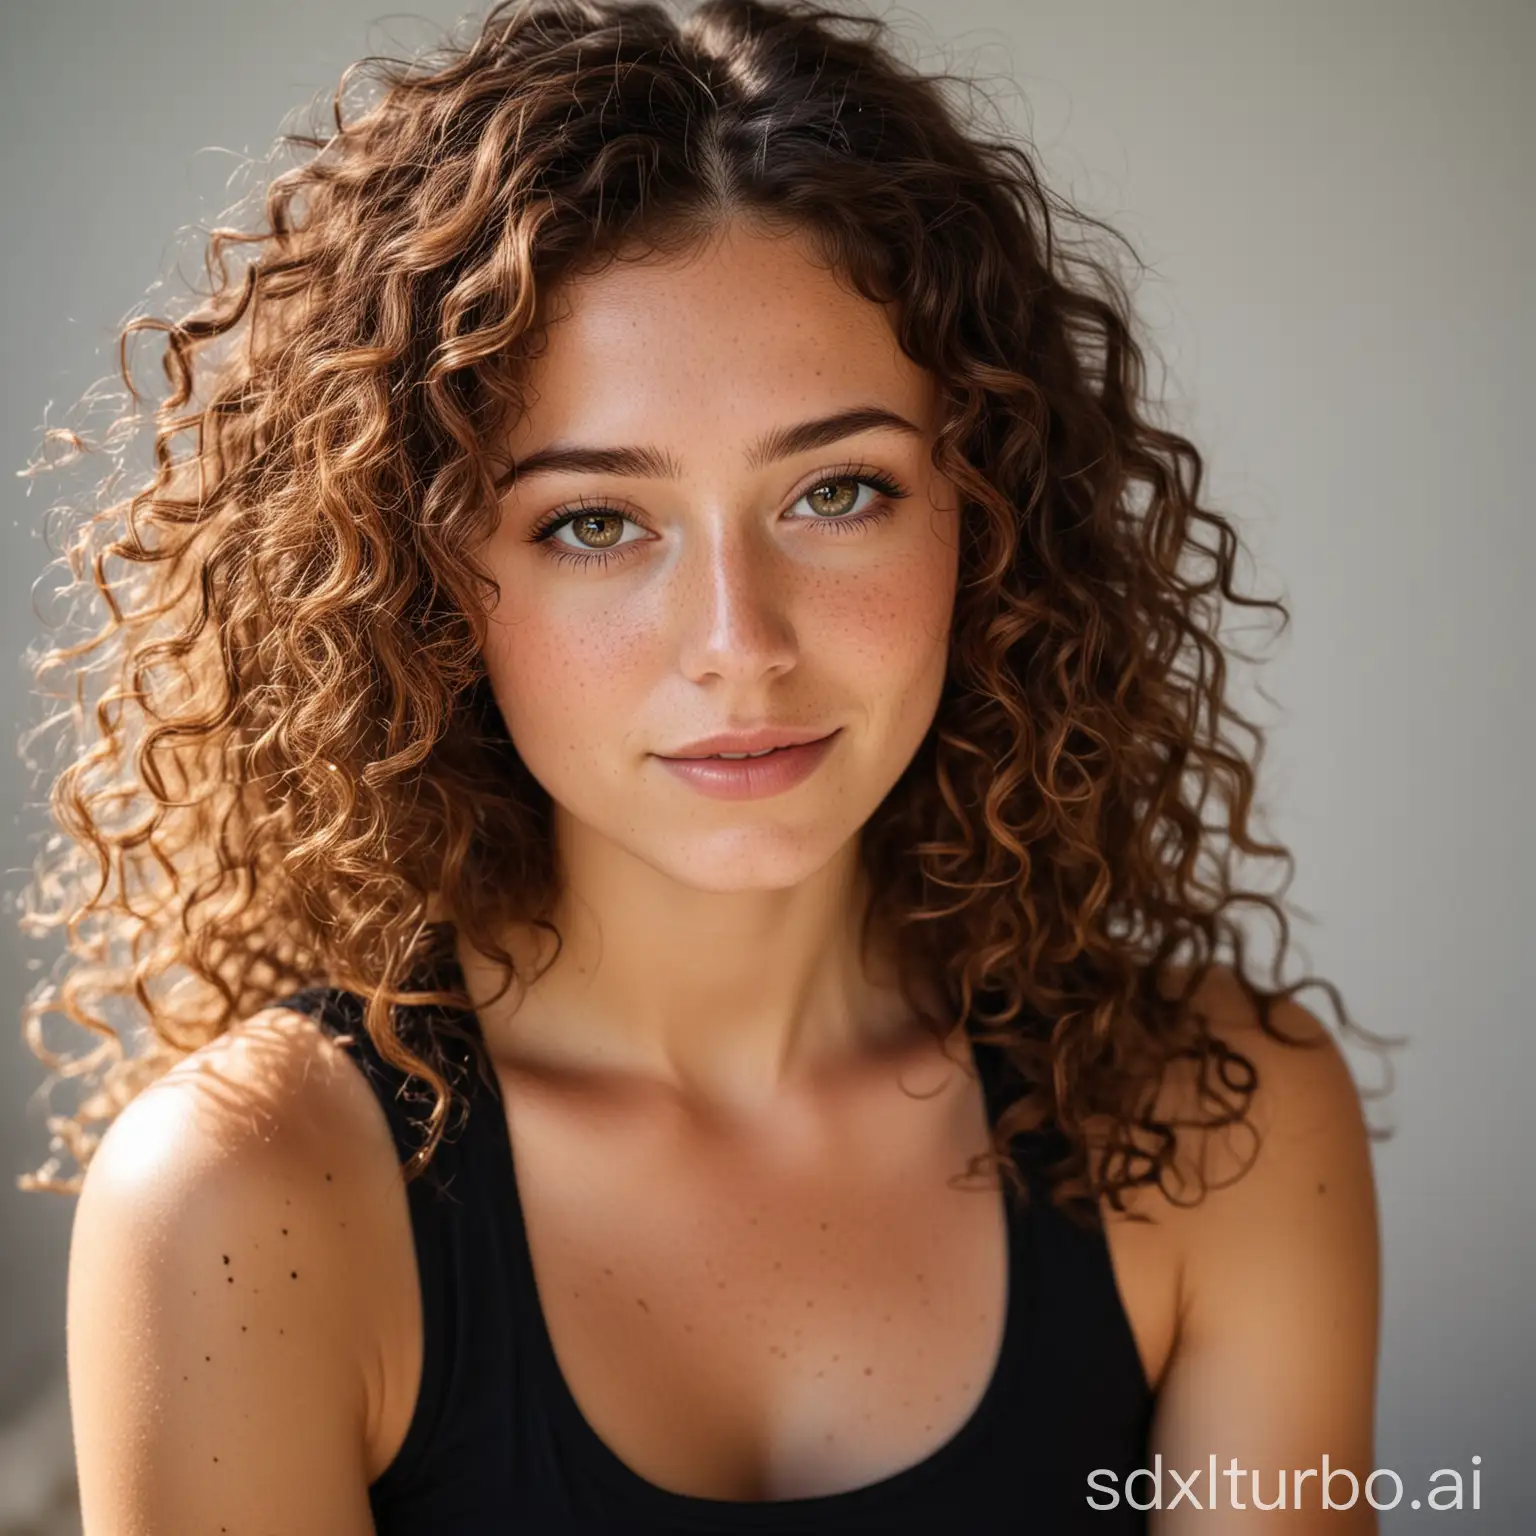 Beautiful-Woman-with-Freckles-in-Black-Tank-Top-HD-Candid-Photography